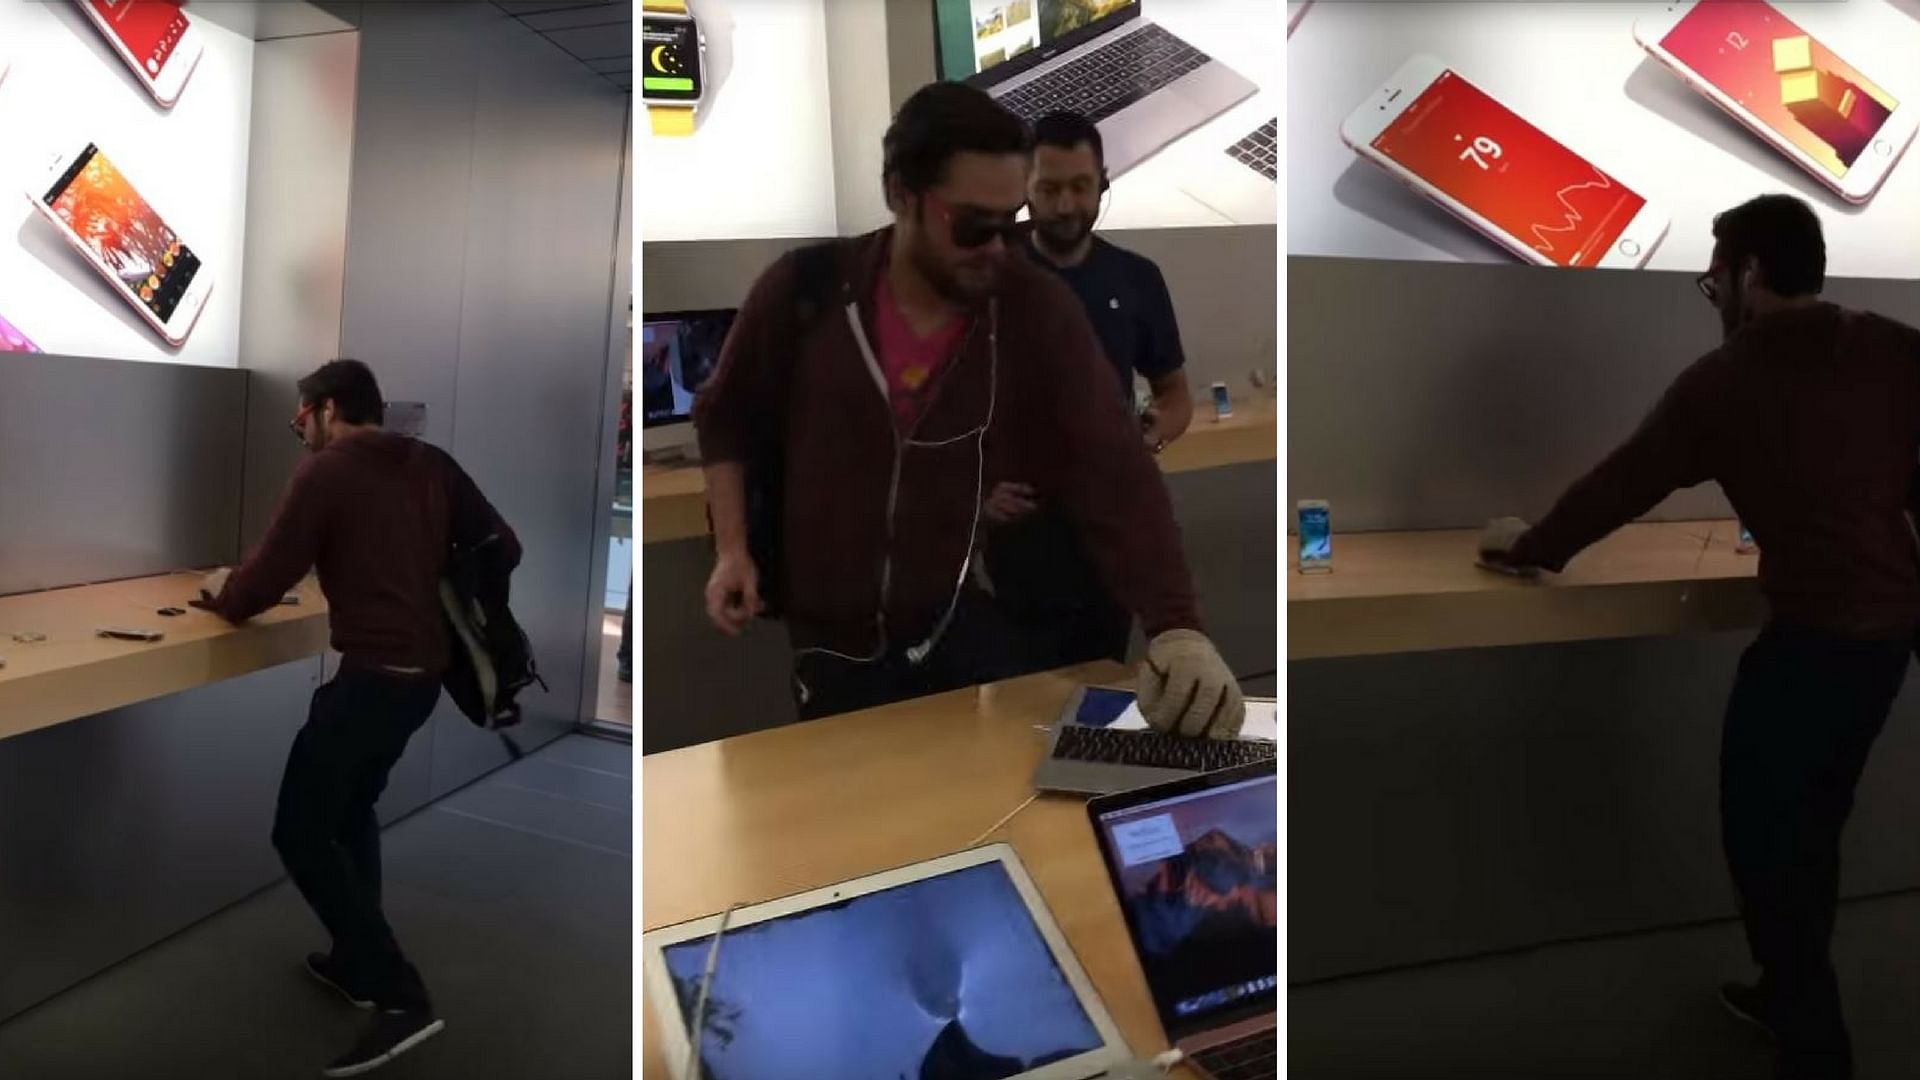 The man can be seen removing display products from the Apple stands and then smashing them with a heavy steel ball. (Photo Courtesy: YouTube/<a href="https://www.youtube.com/channel/UCPQNFpfN4H1gpNBCoJIAtcw">ste cluz</a>)